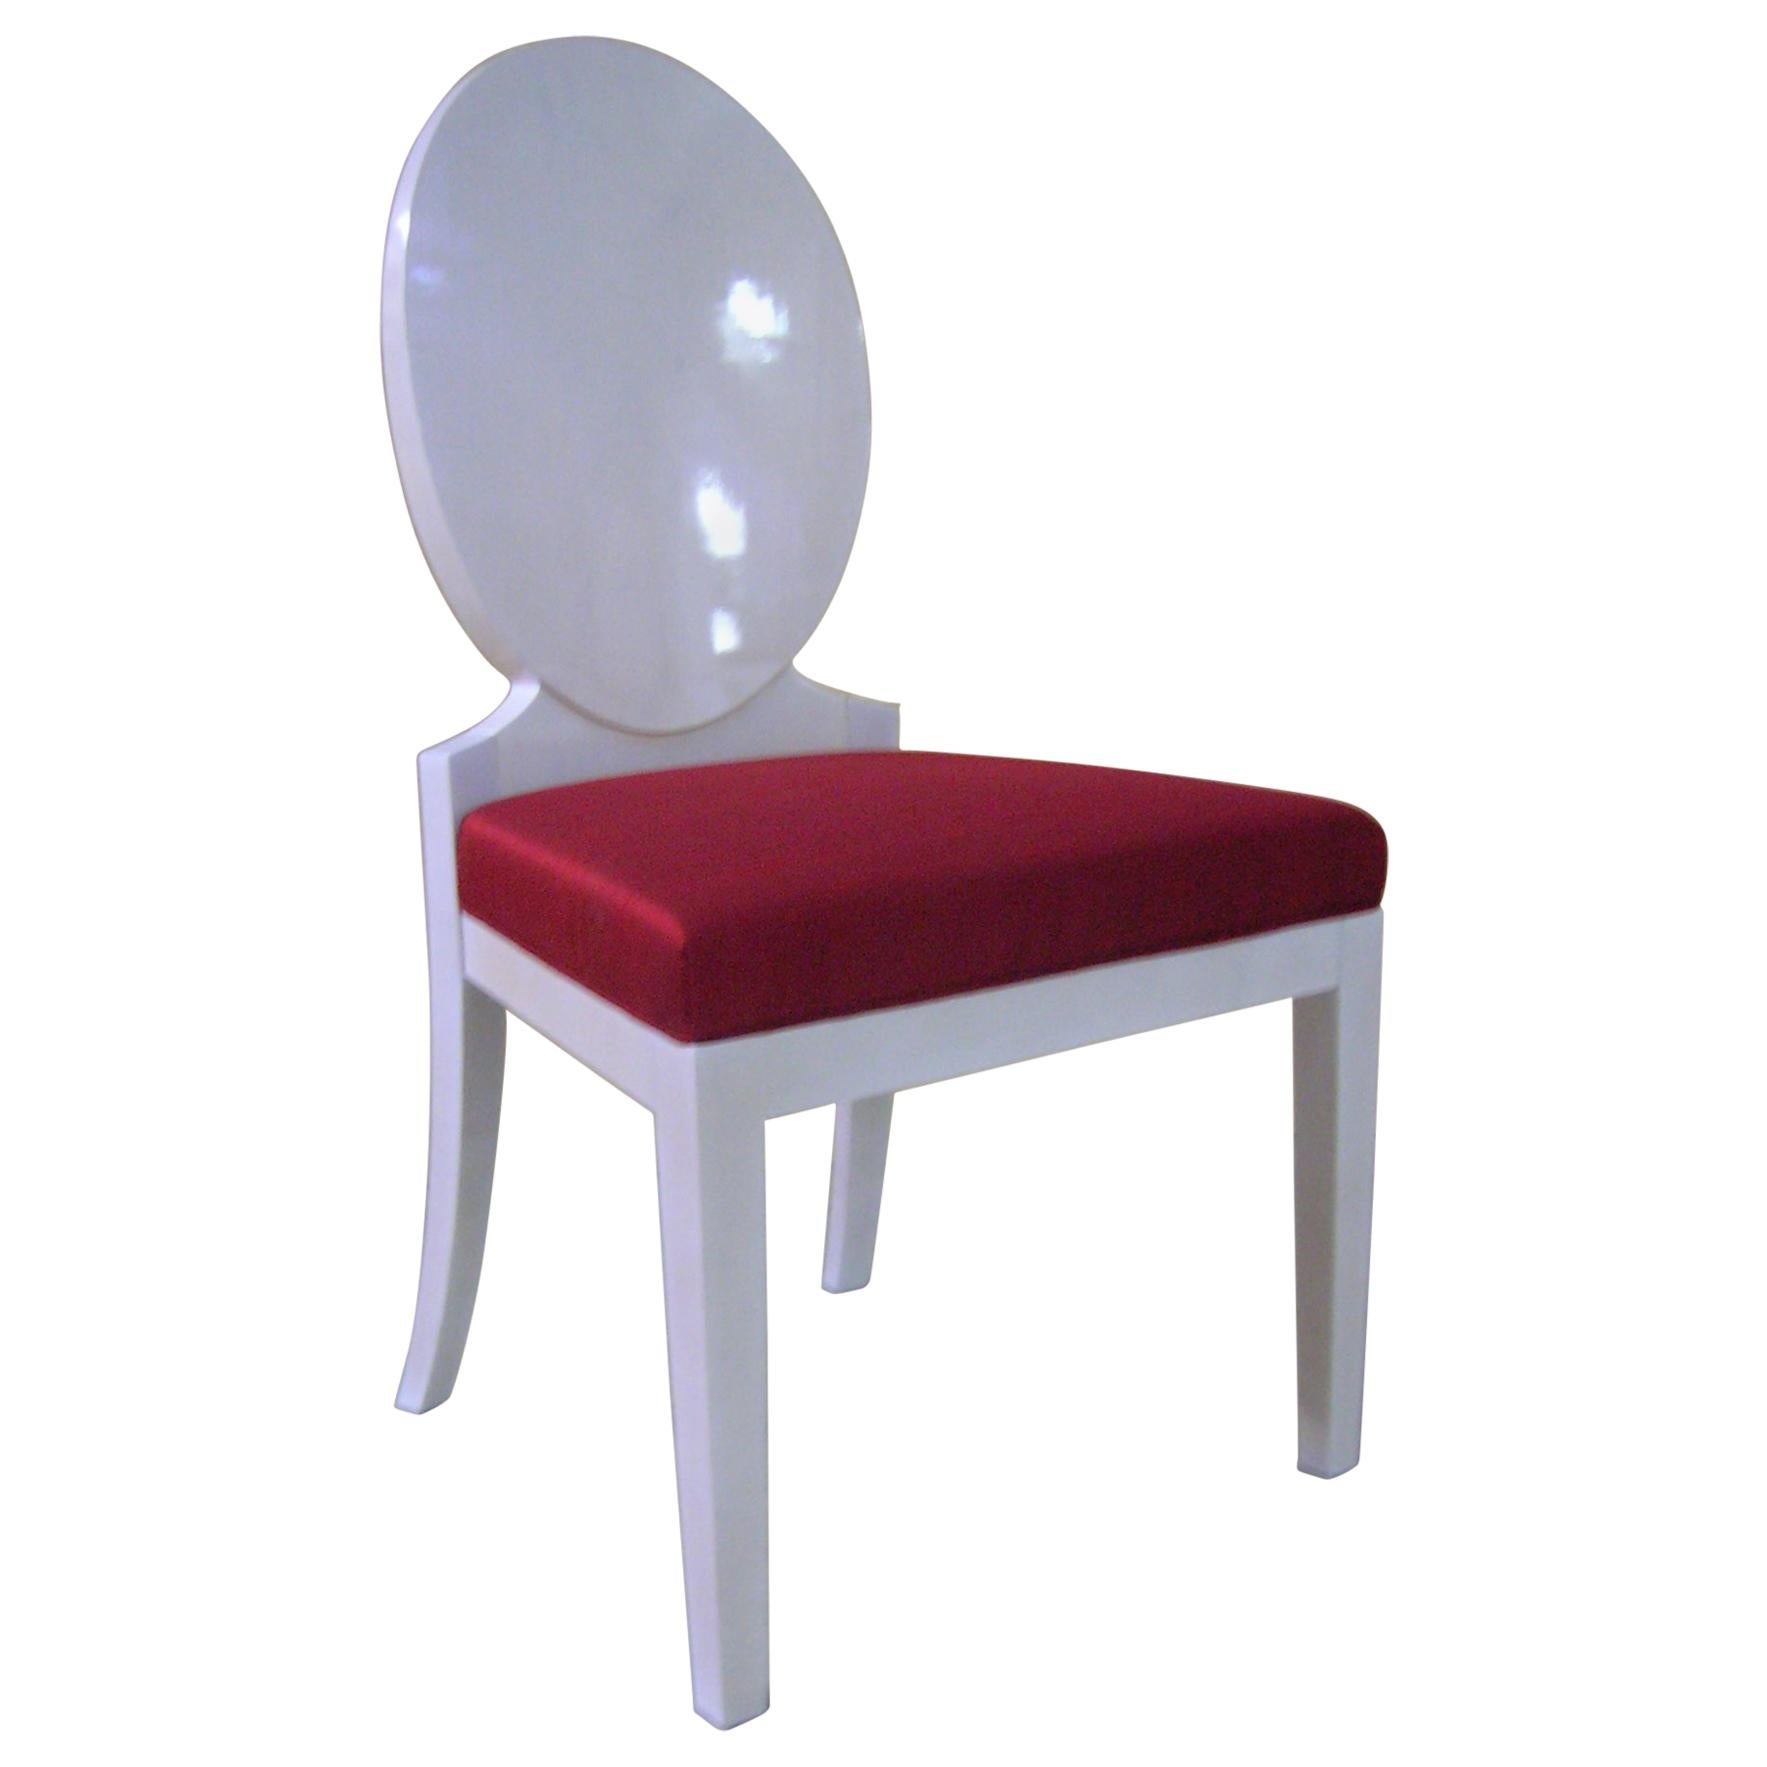 PRETTY Chair in Solid Wood and Red Velvet Padded Seat - white finish